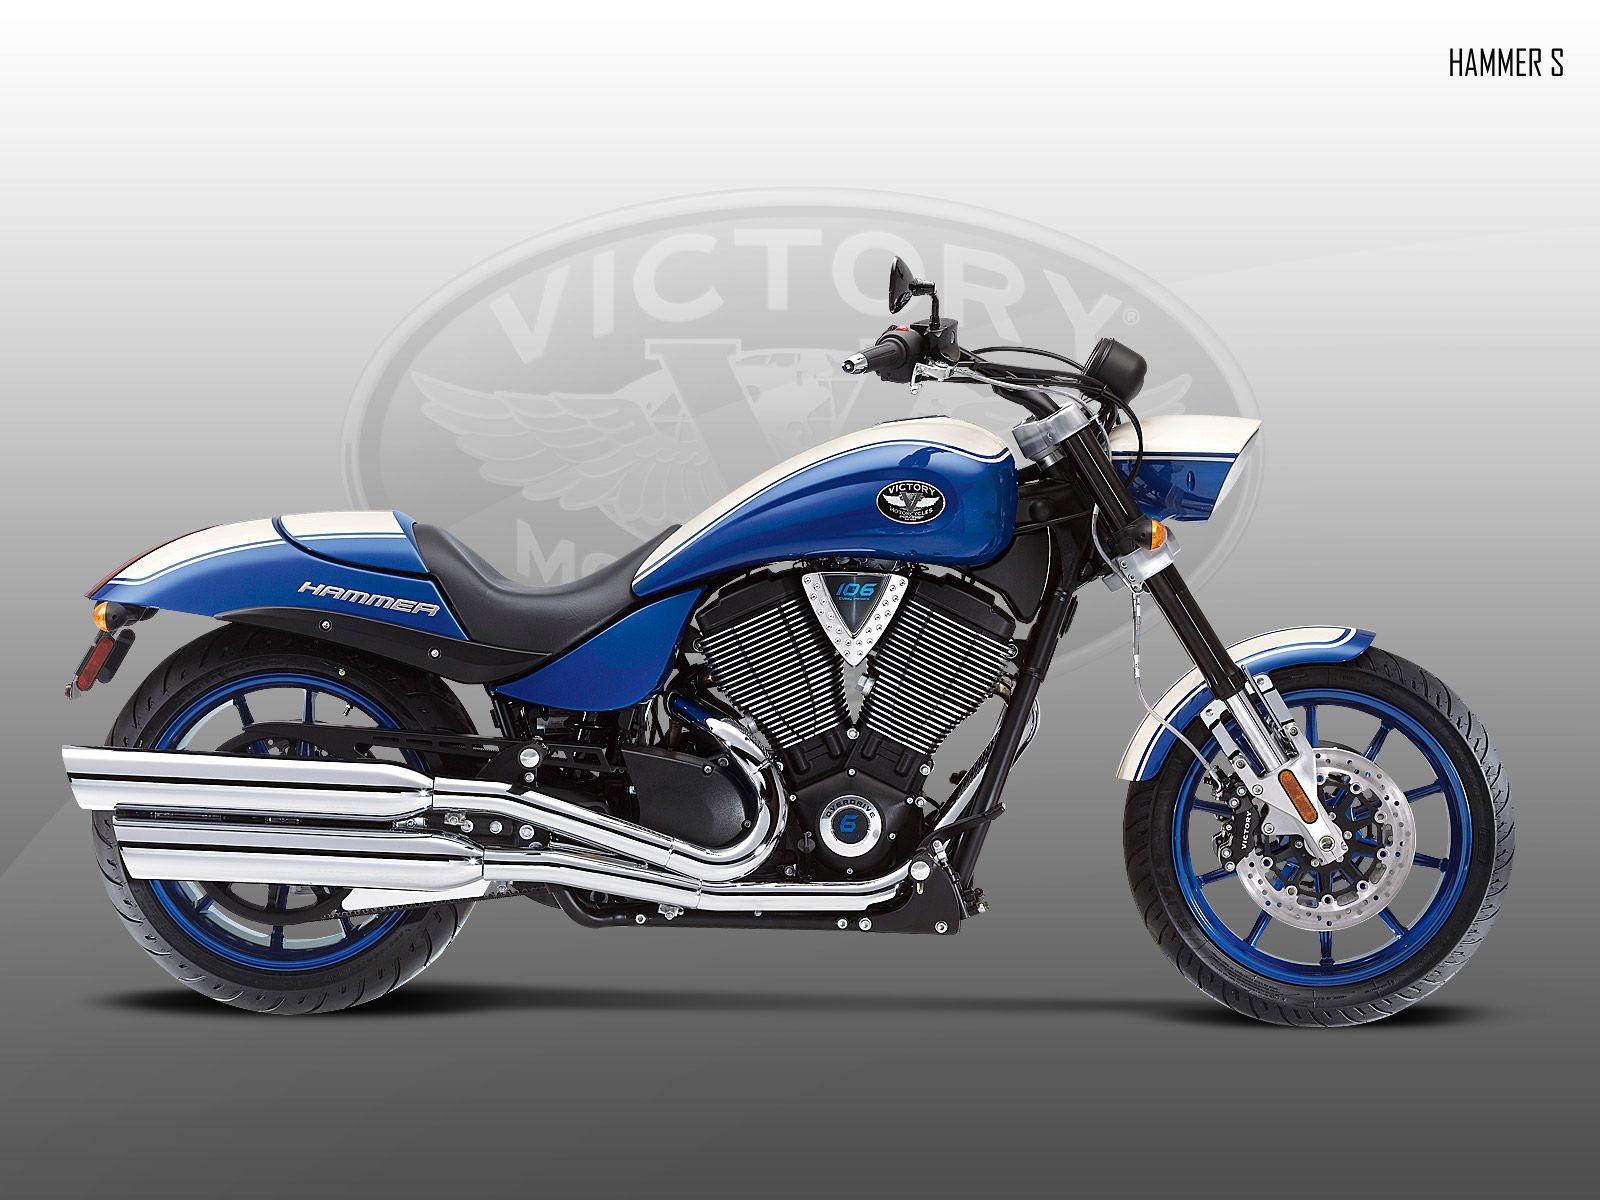  2009 Victory Hammer S